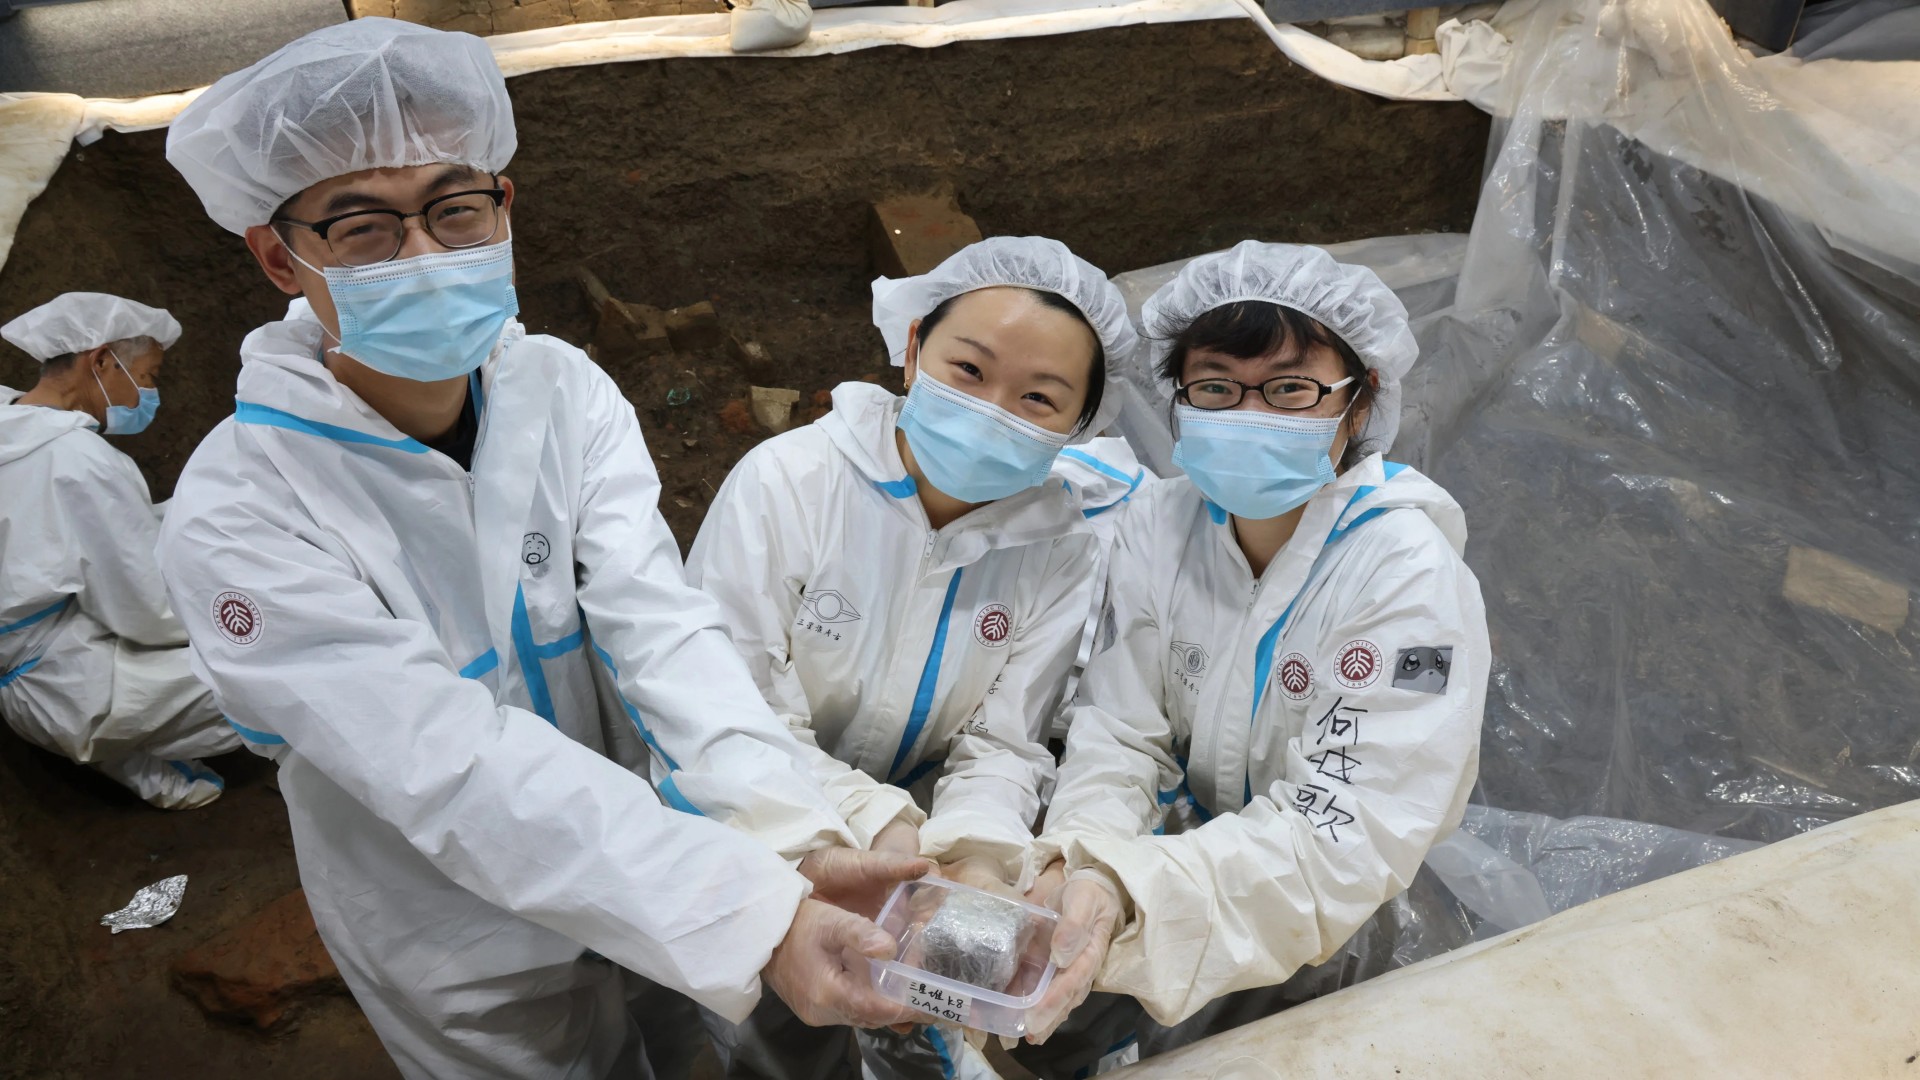 Archaeologist Li Nan (centre) with two members of the Peking University archaeological team at the Sanxingdui archaeological site in Sichuan province, China. (plus one more person working in the back). Everyone covered their hair, covered their faces and wore white protective gear.